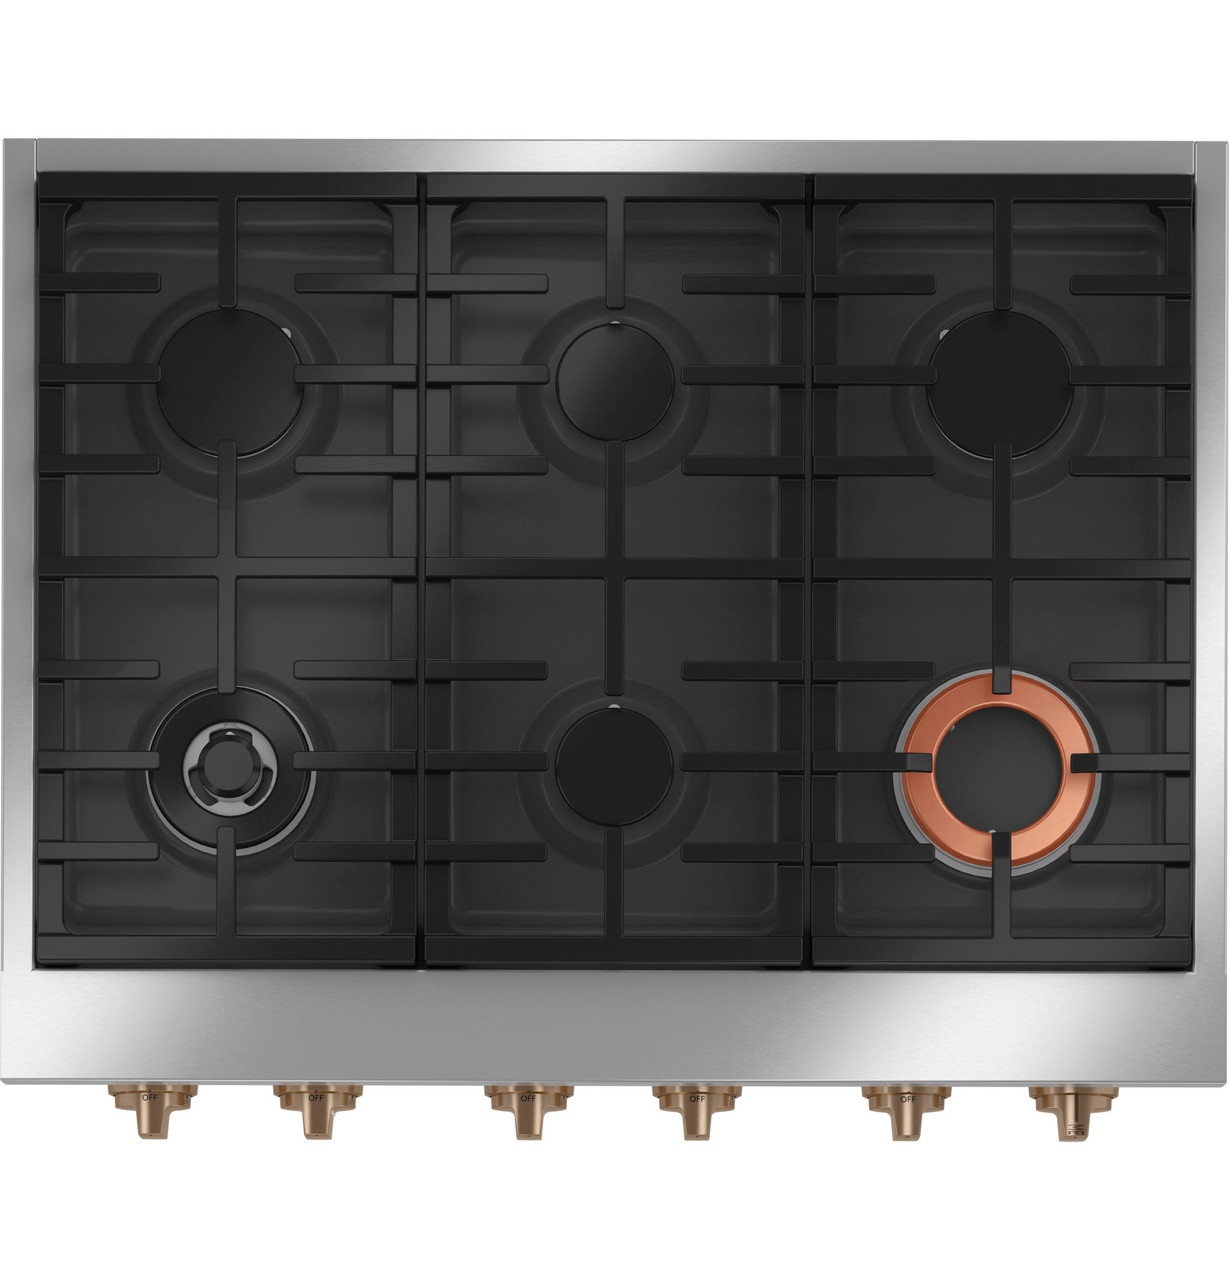 Café™ 48 Commercial-Style Gas Rangetop with 6 Burners and Integrated  Griddle (Natural Gas) - CGU486P4TW2 - Cafe Appliances